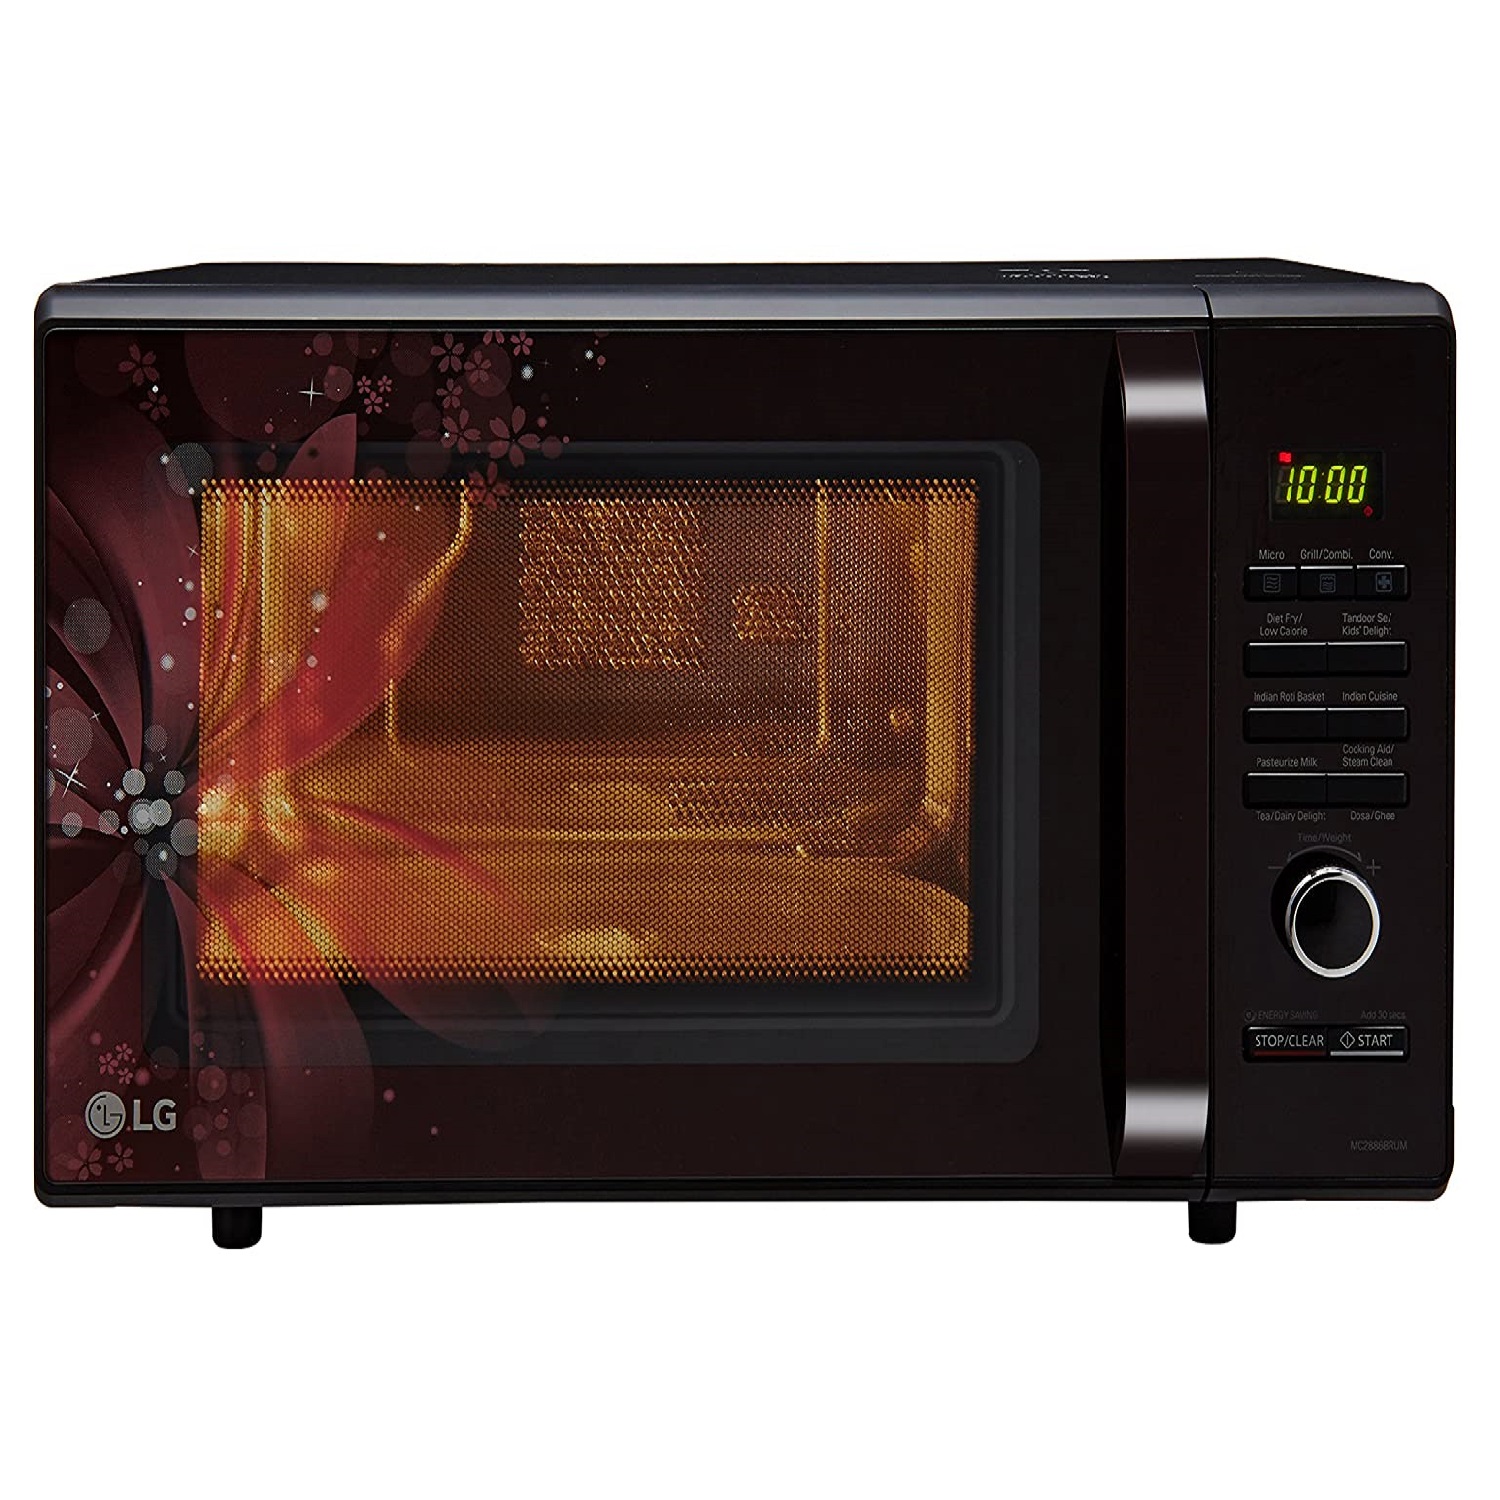 LG 28 L Convection Microwave Oven (MC2886BRUM, Black, With Starter Kit)